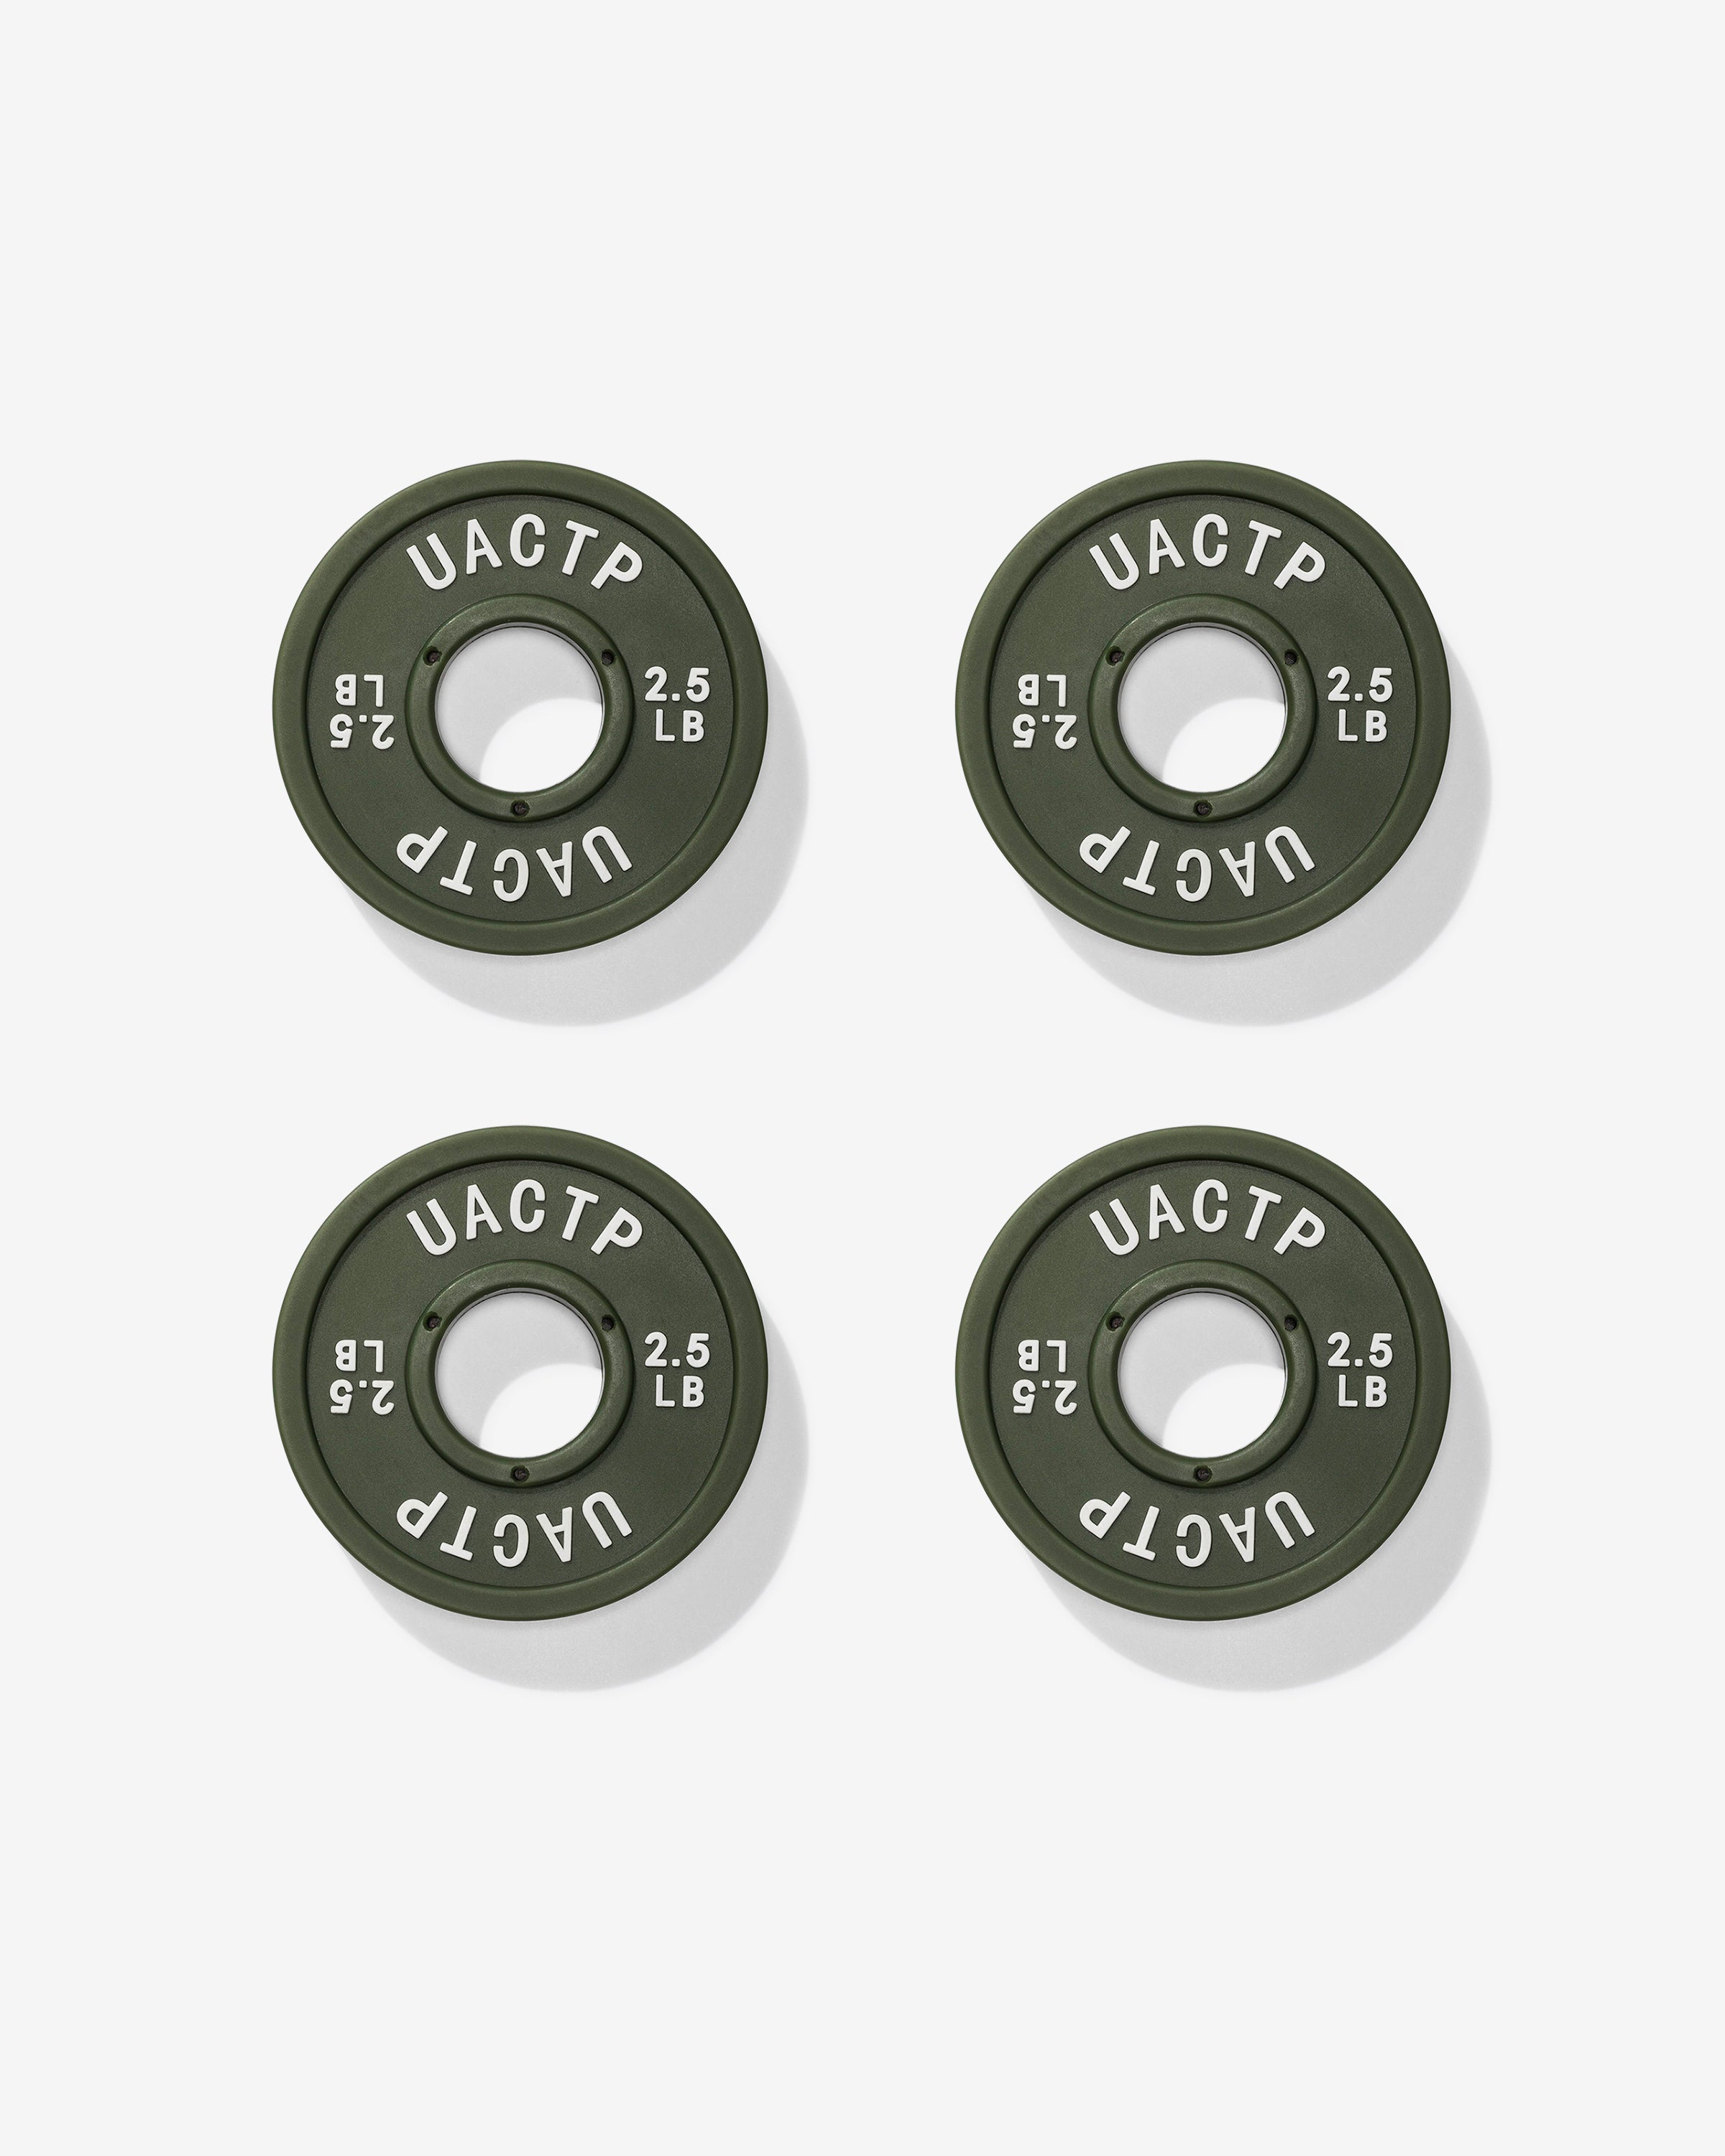 UACTP OLYMPIC DUMBBELL SET